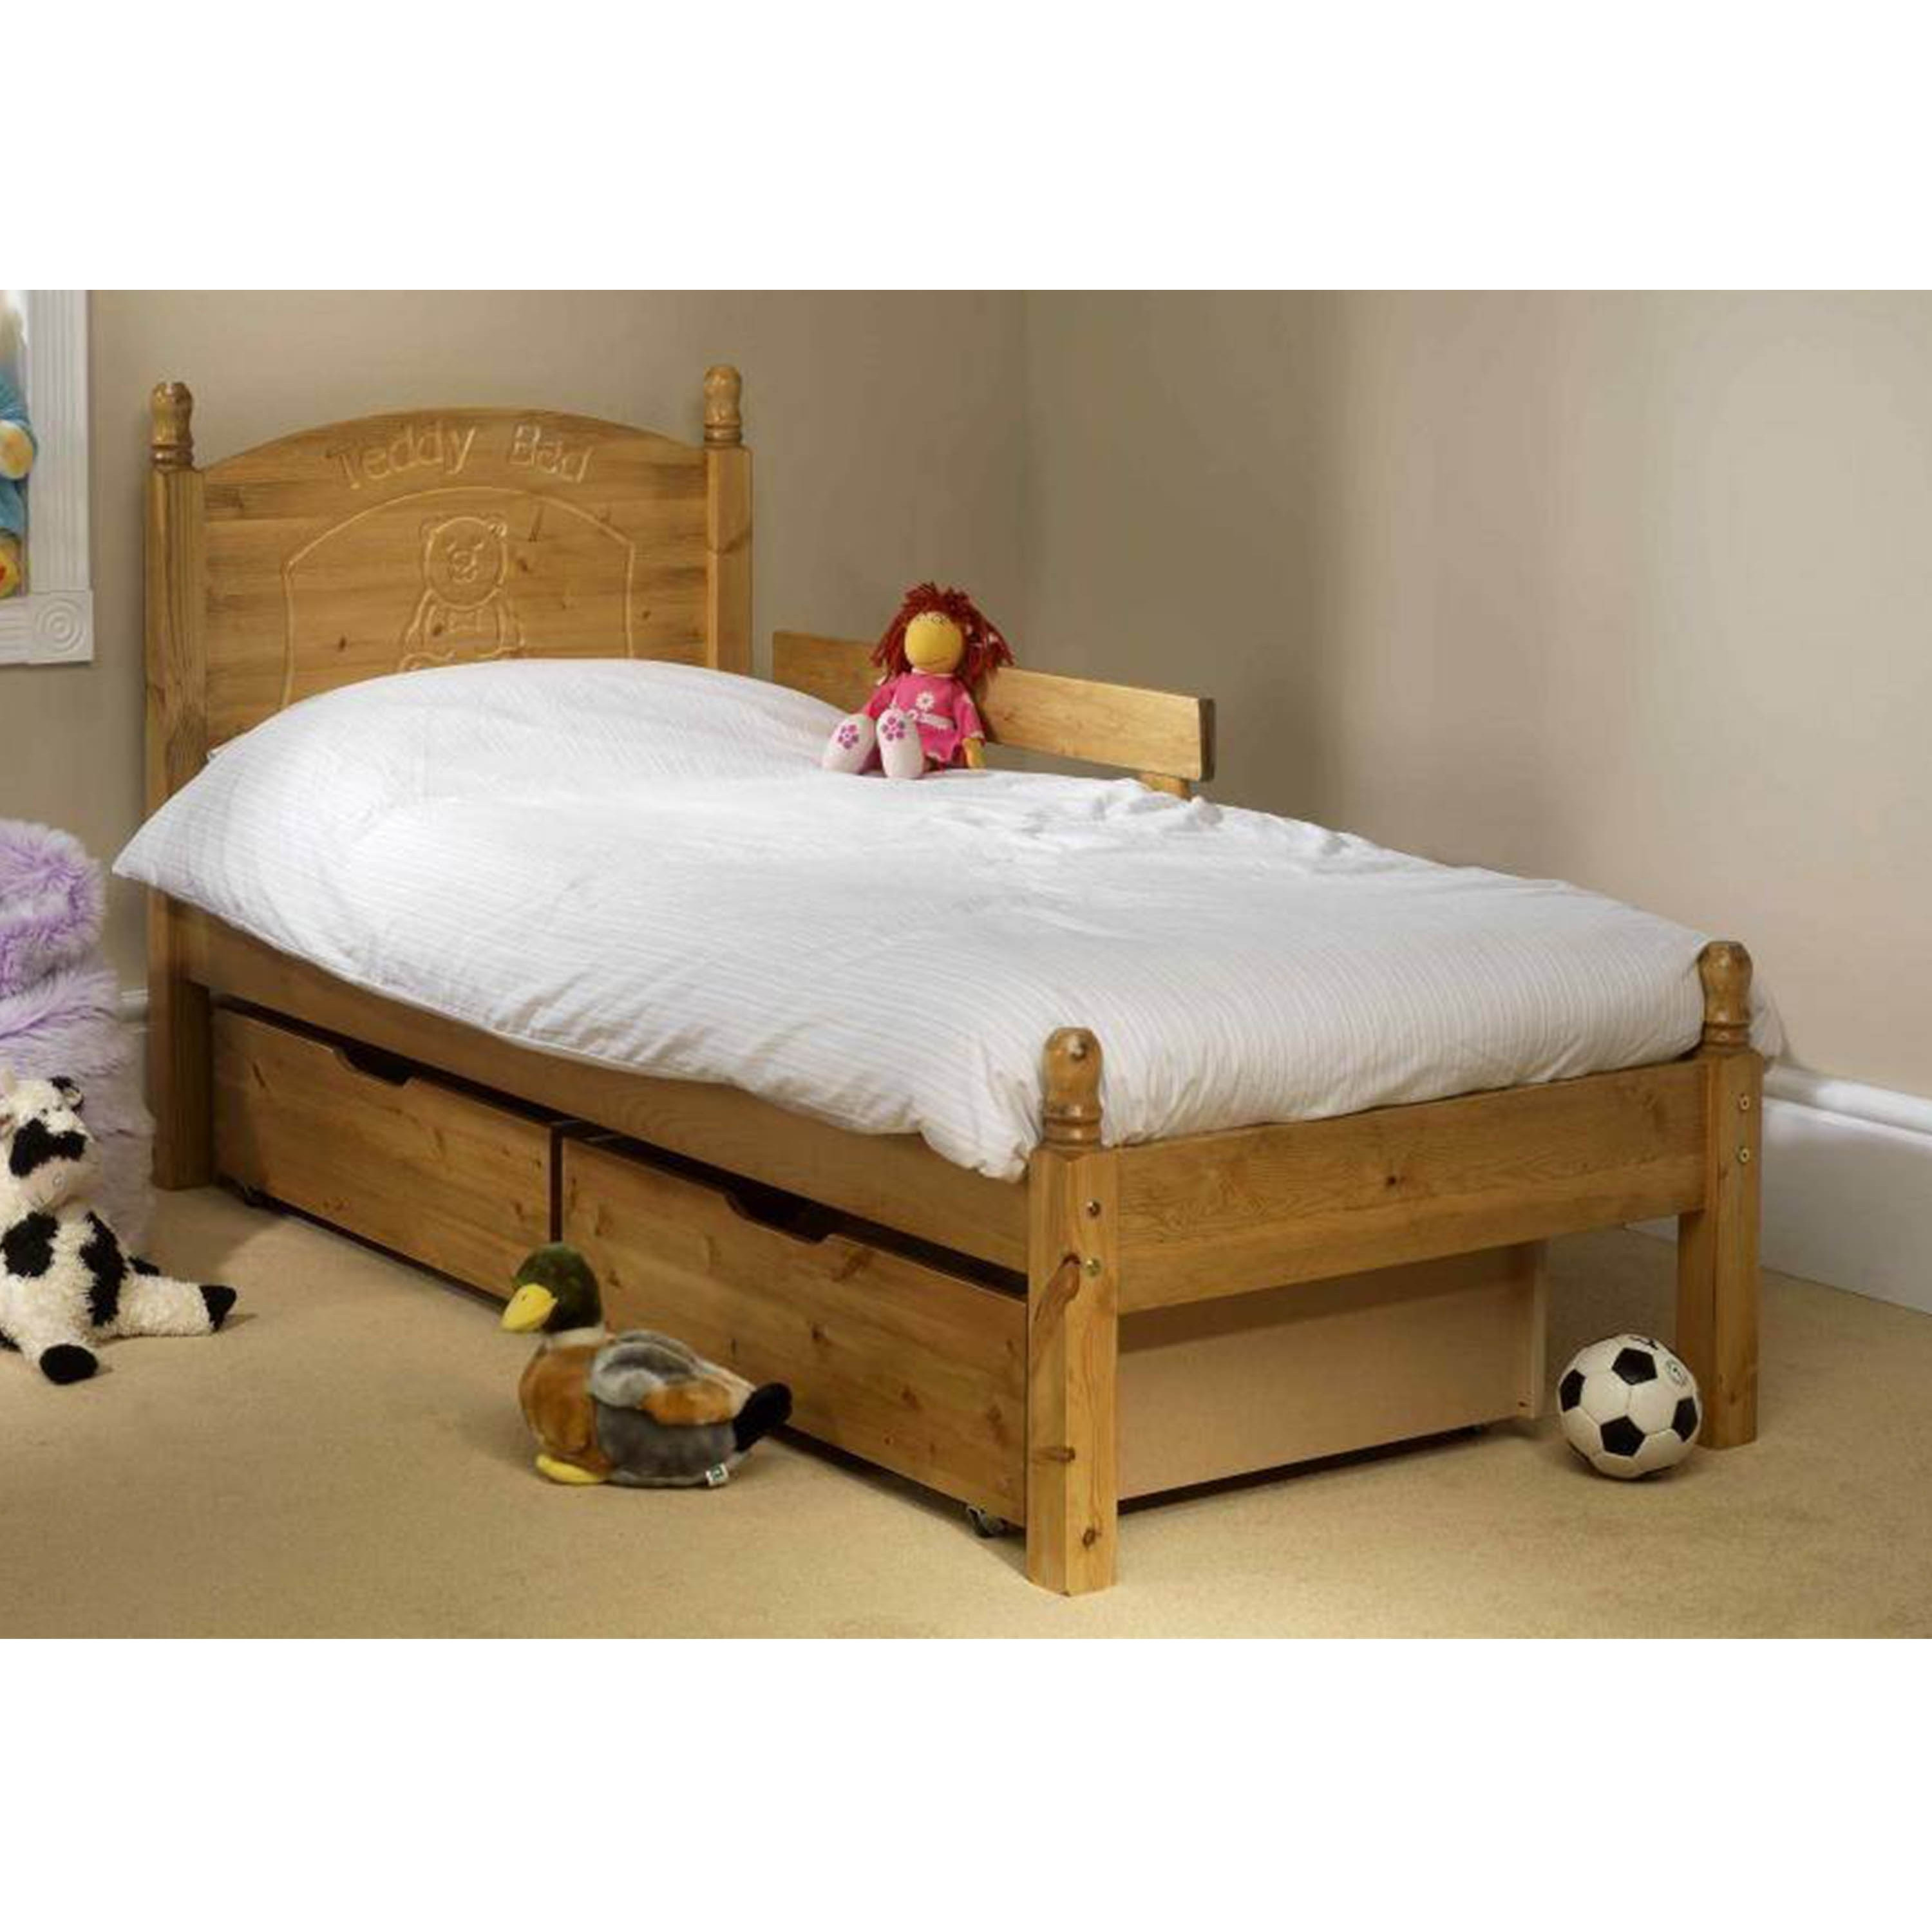 Friendship Mill Teddy Wooden Bed Frame - image 1